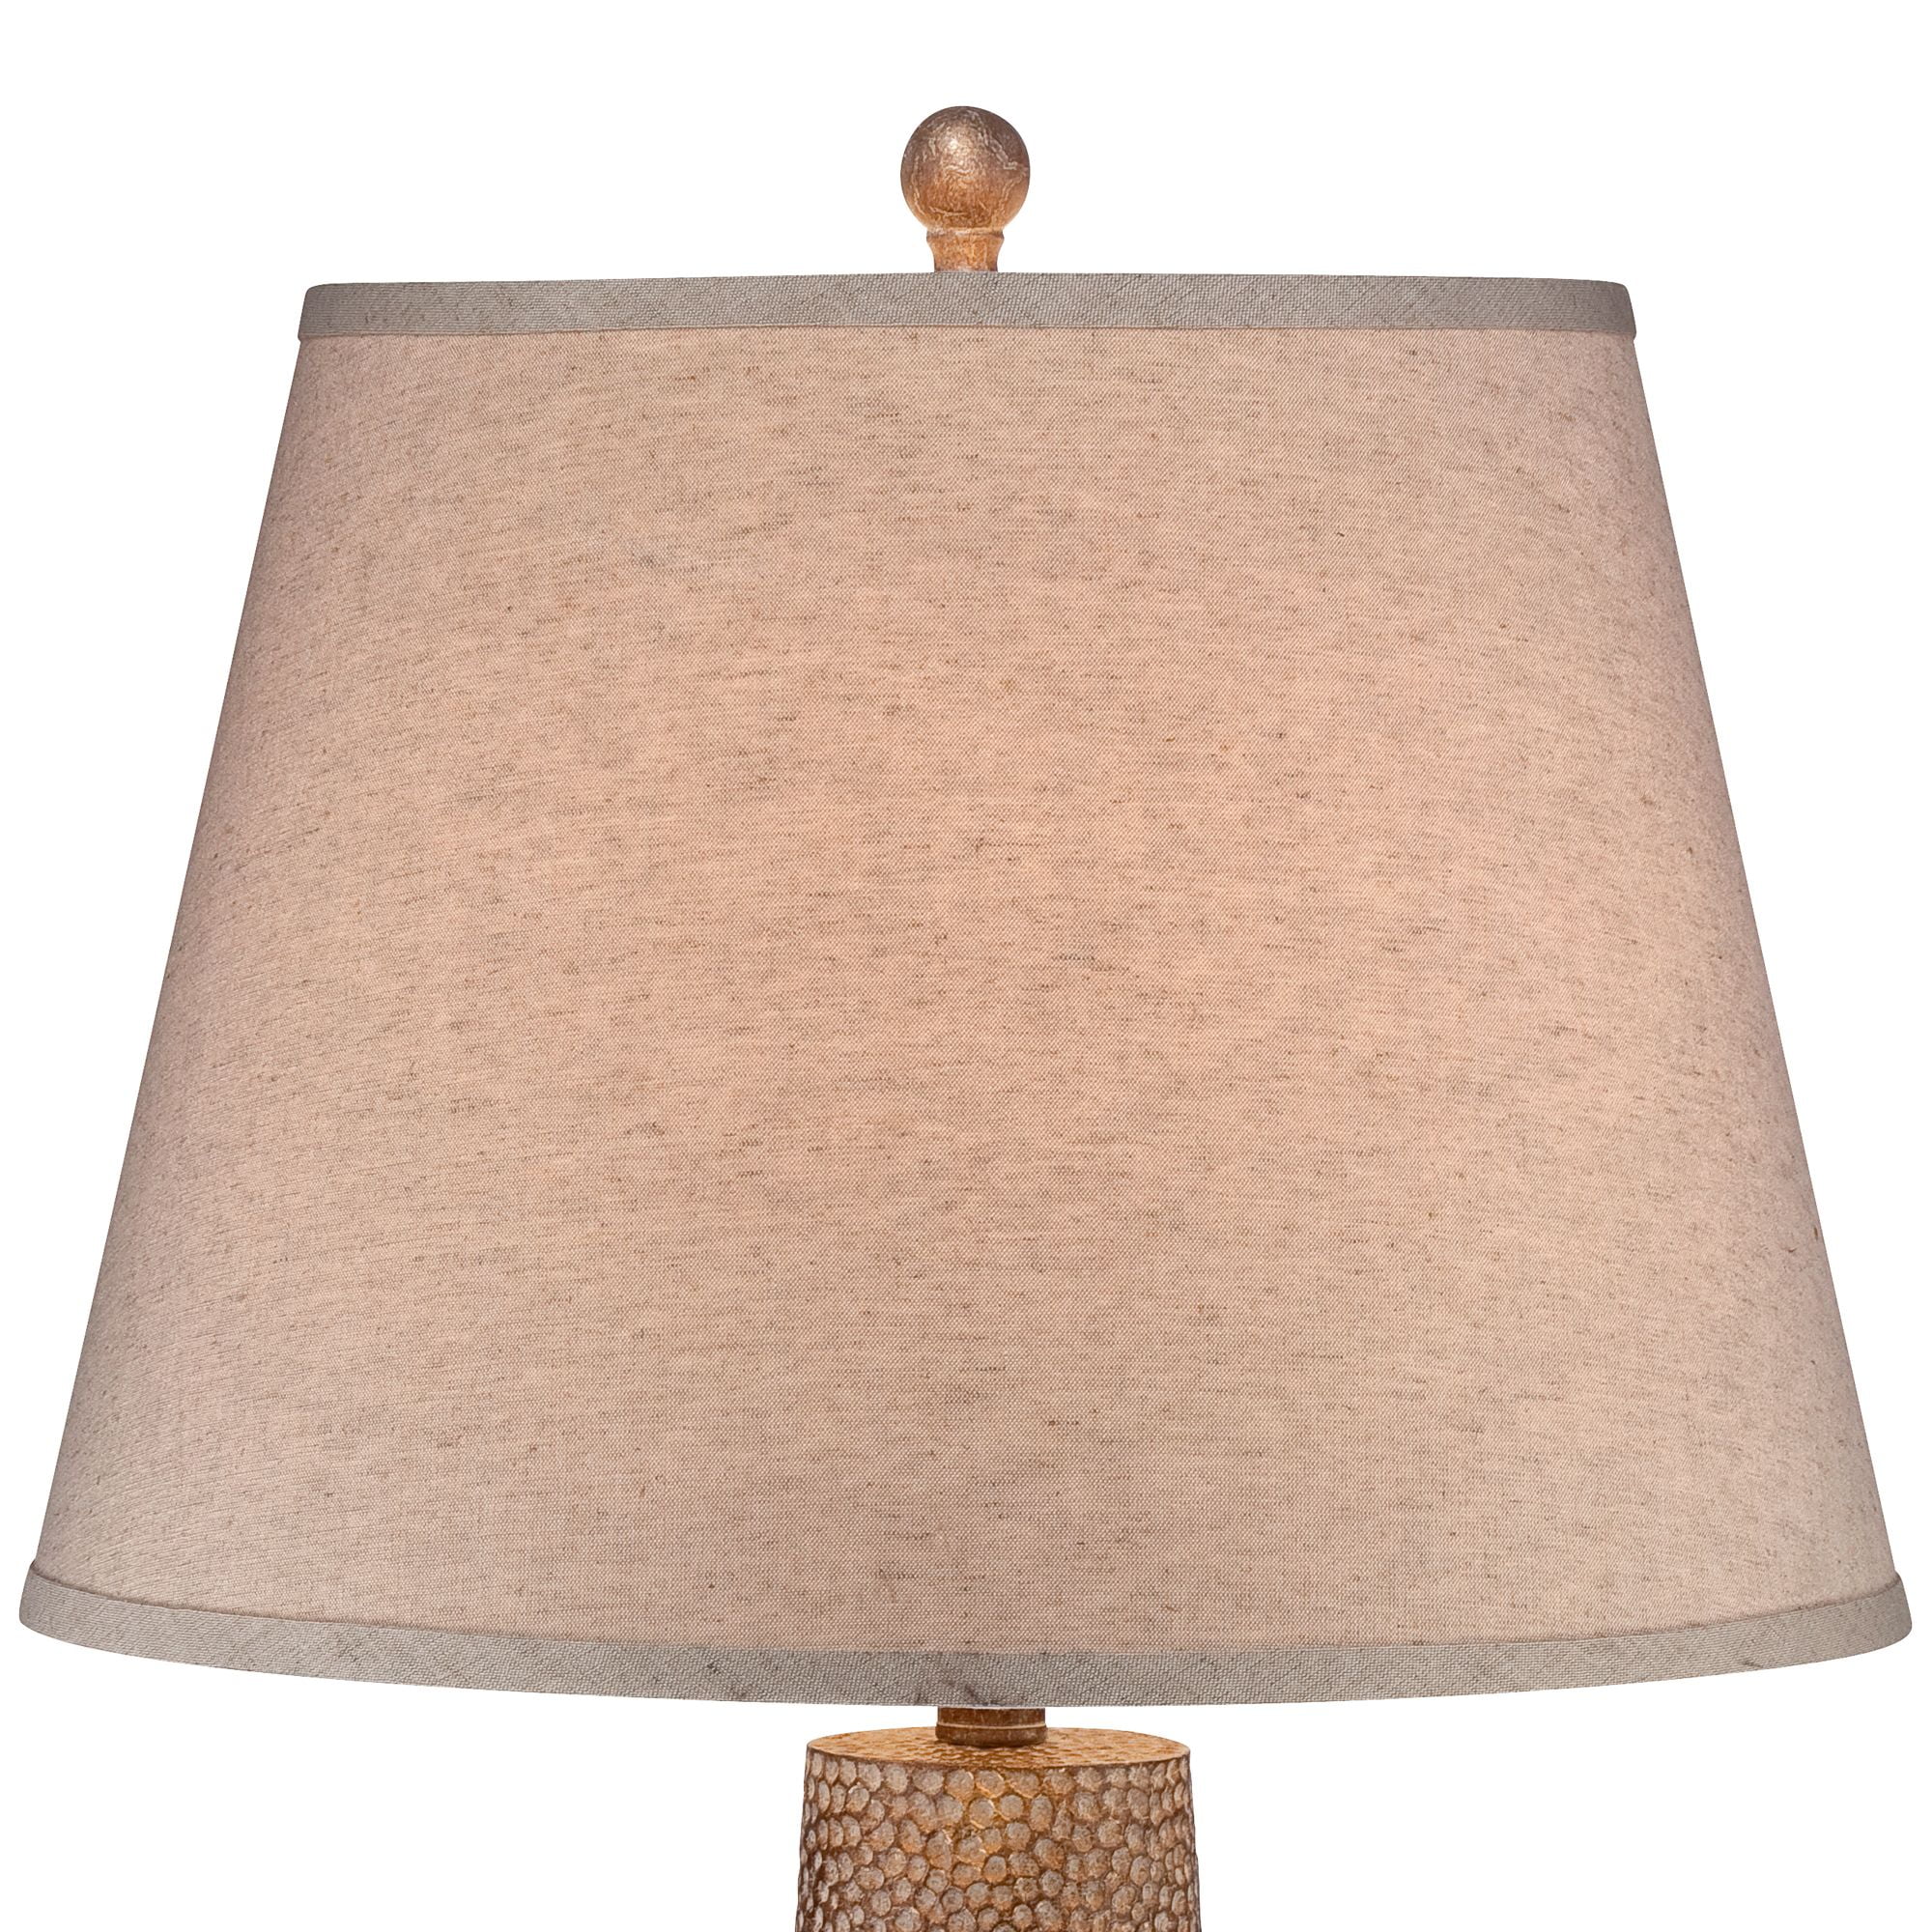 Maison Loft Rustic Farmhouse Table Lamp Hammered Antique Brass Cream Linen  Drum Shade for Living Room Bedroom Bedside Nightstand Office Family  Traditional - Franklin Iron Works 